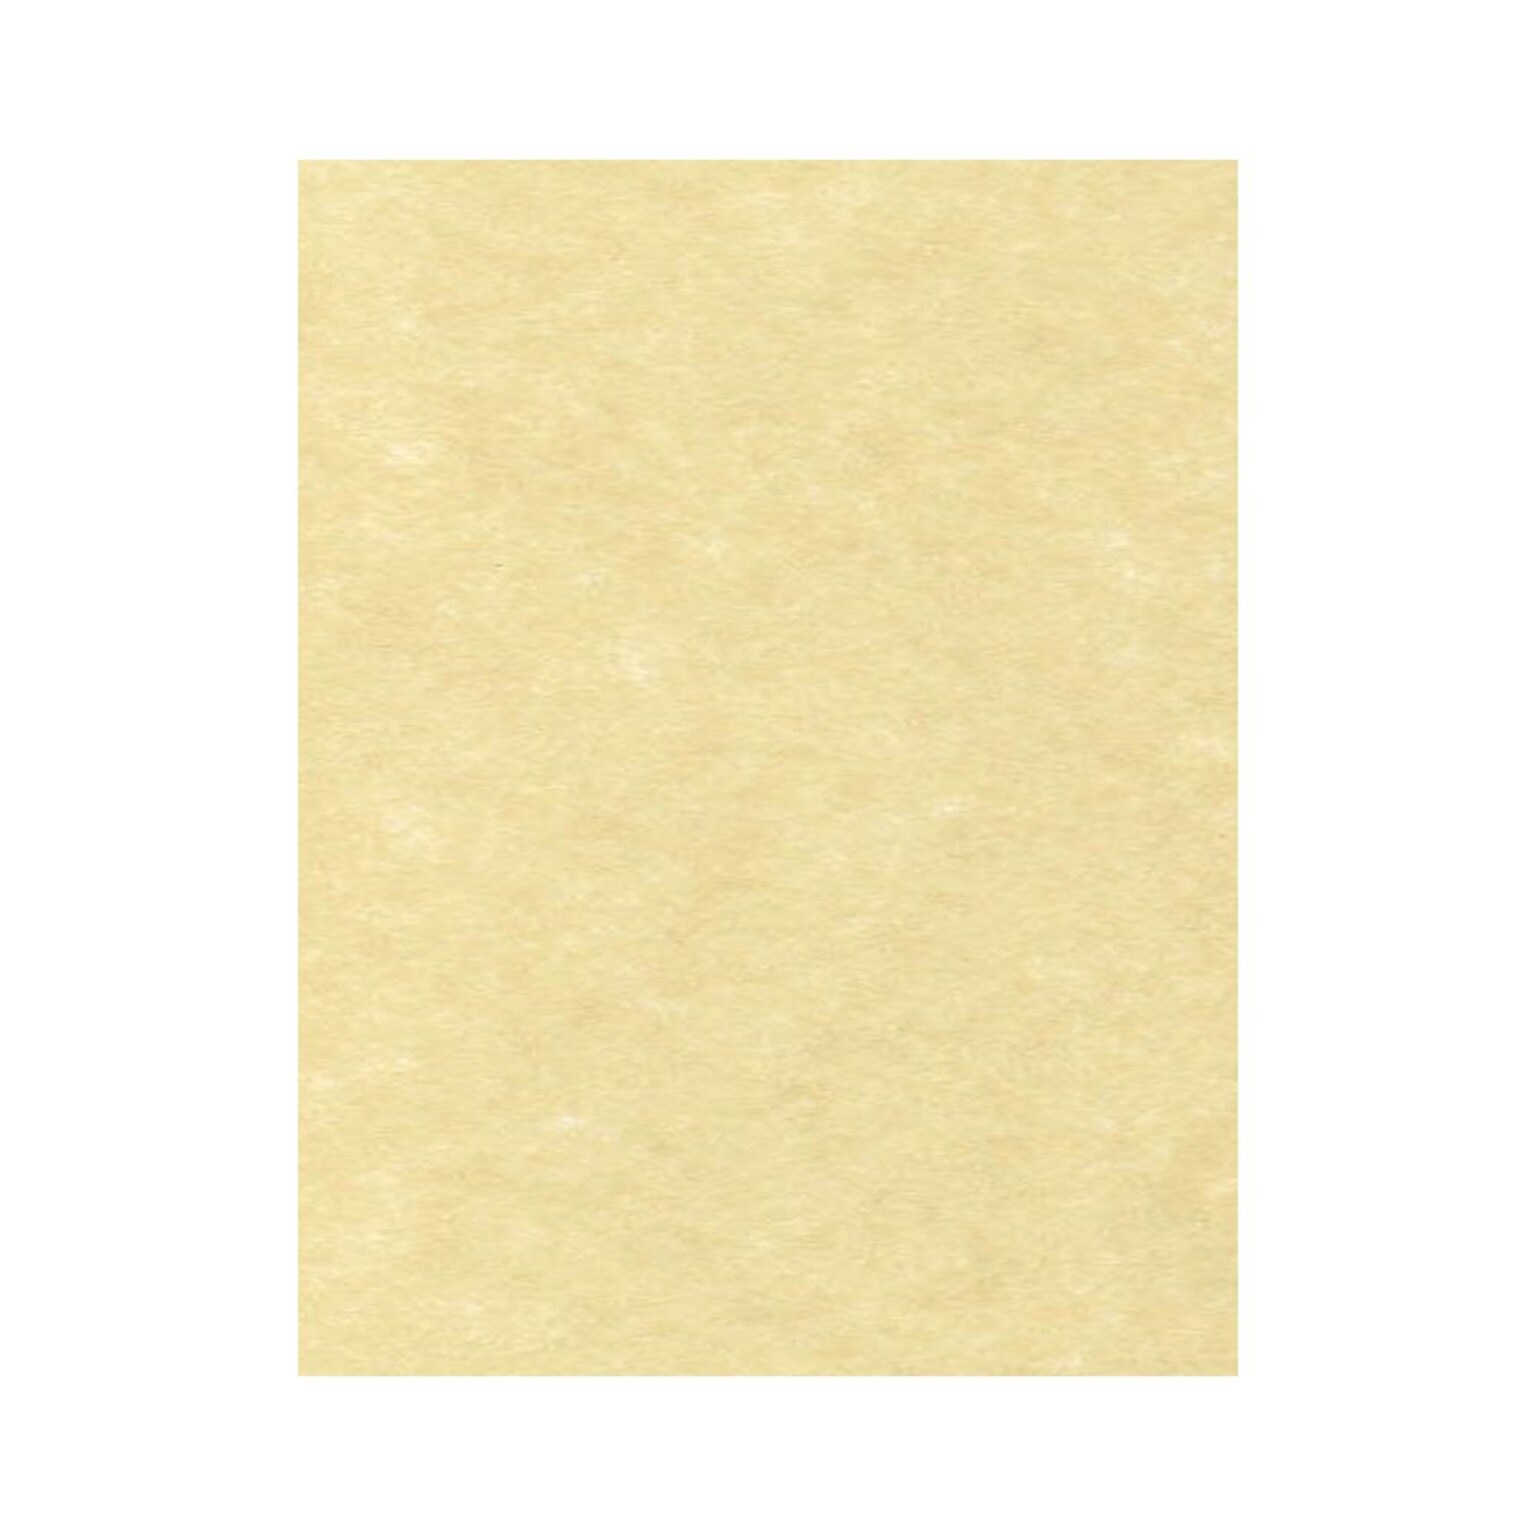 Lux Cardstock 8.5 x 11 inch, Gold Parchment 250/Pack